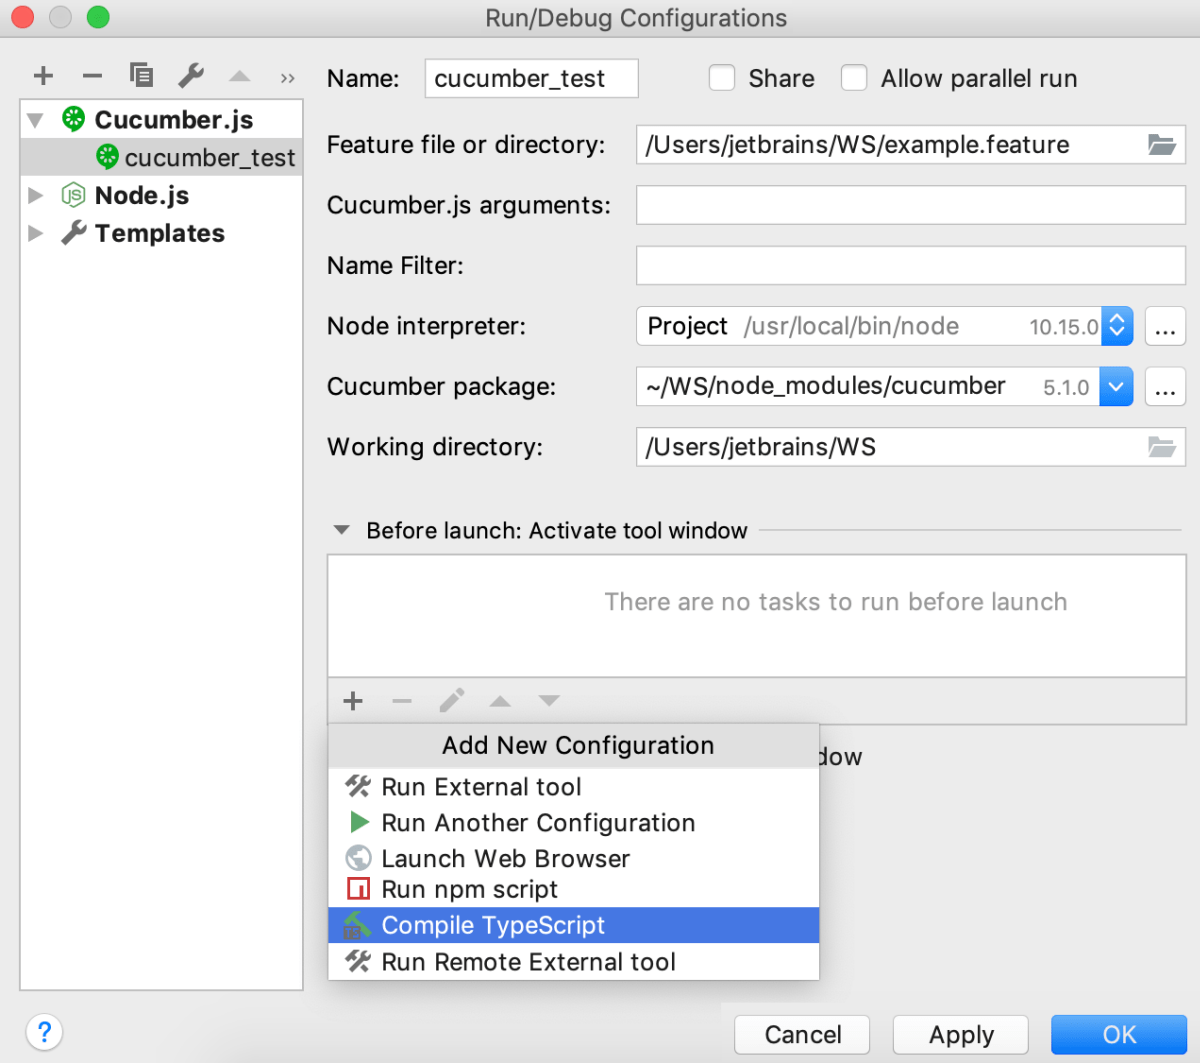 Cucumber.js Run configuration: adding a Compile TypeScript Before launch task